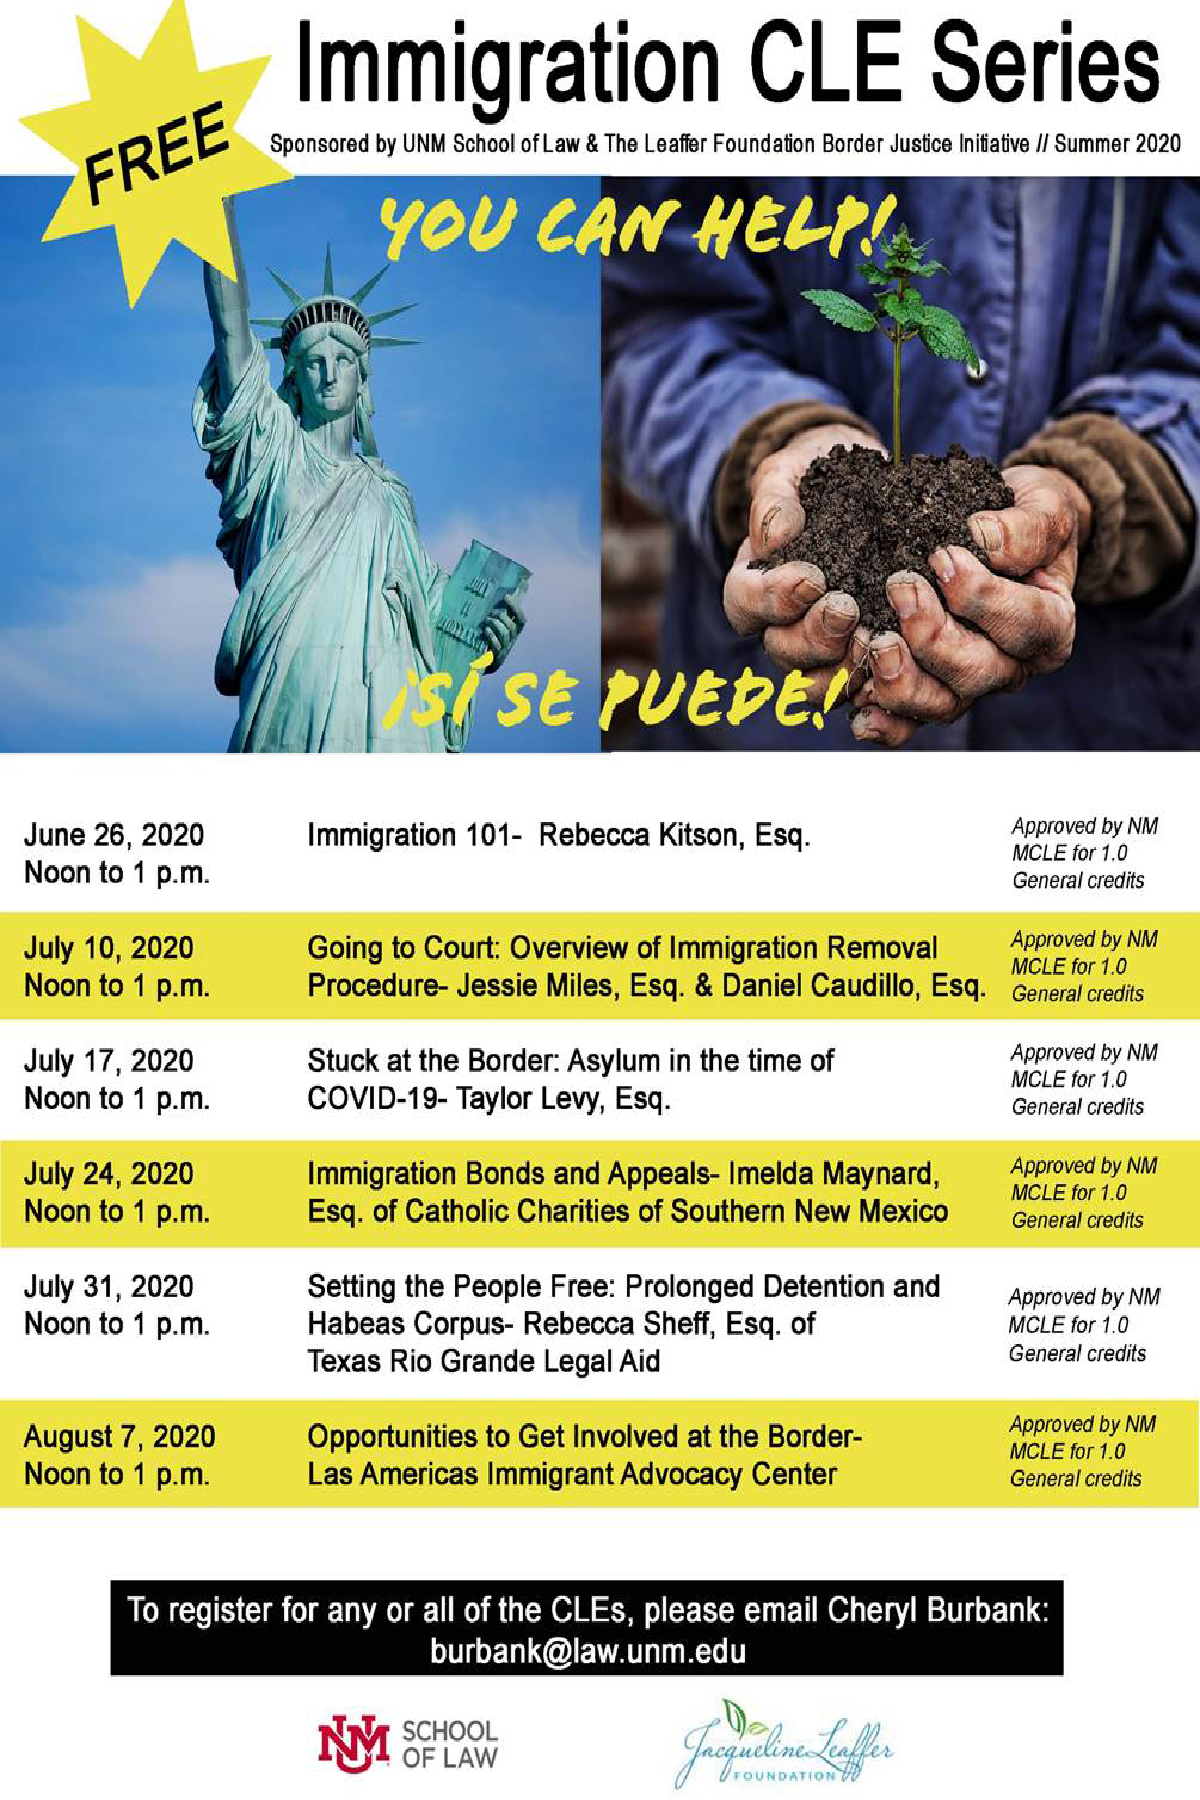 Border Justice Initiative’s Immigration CLE Series schedule